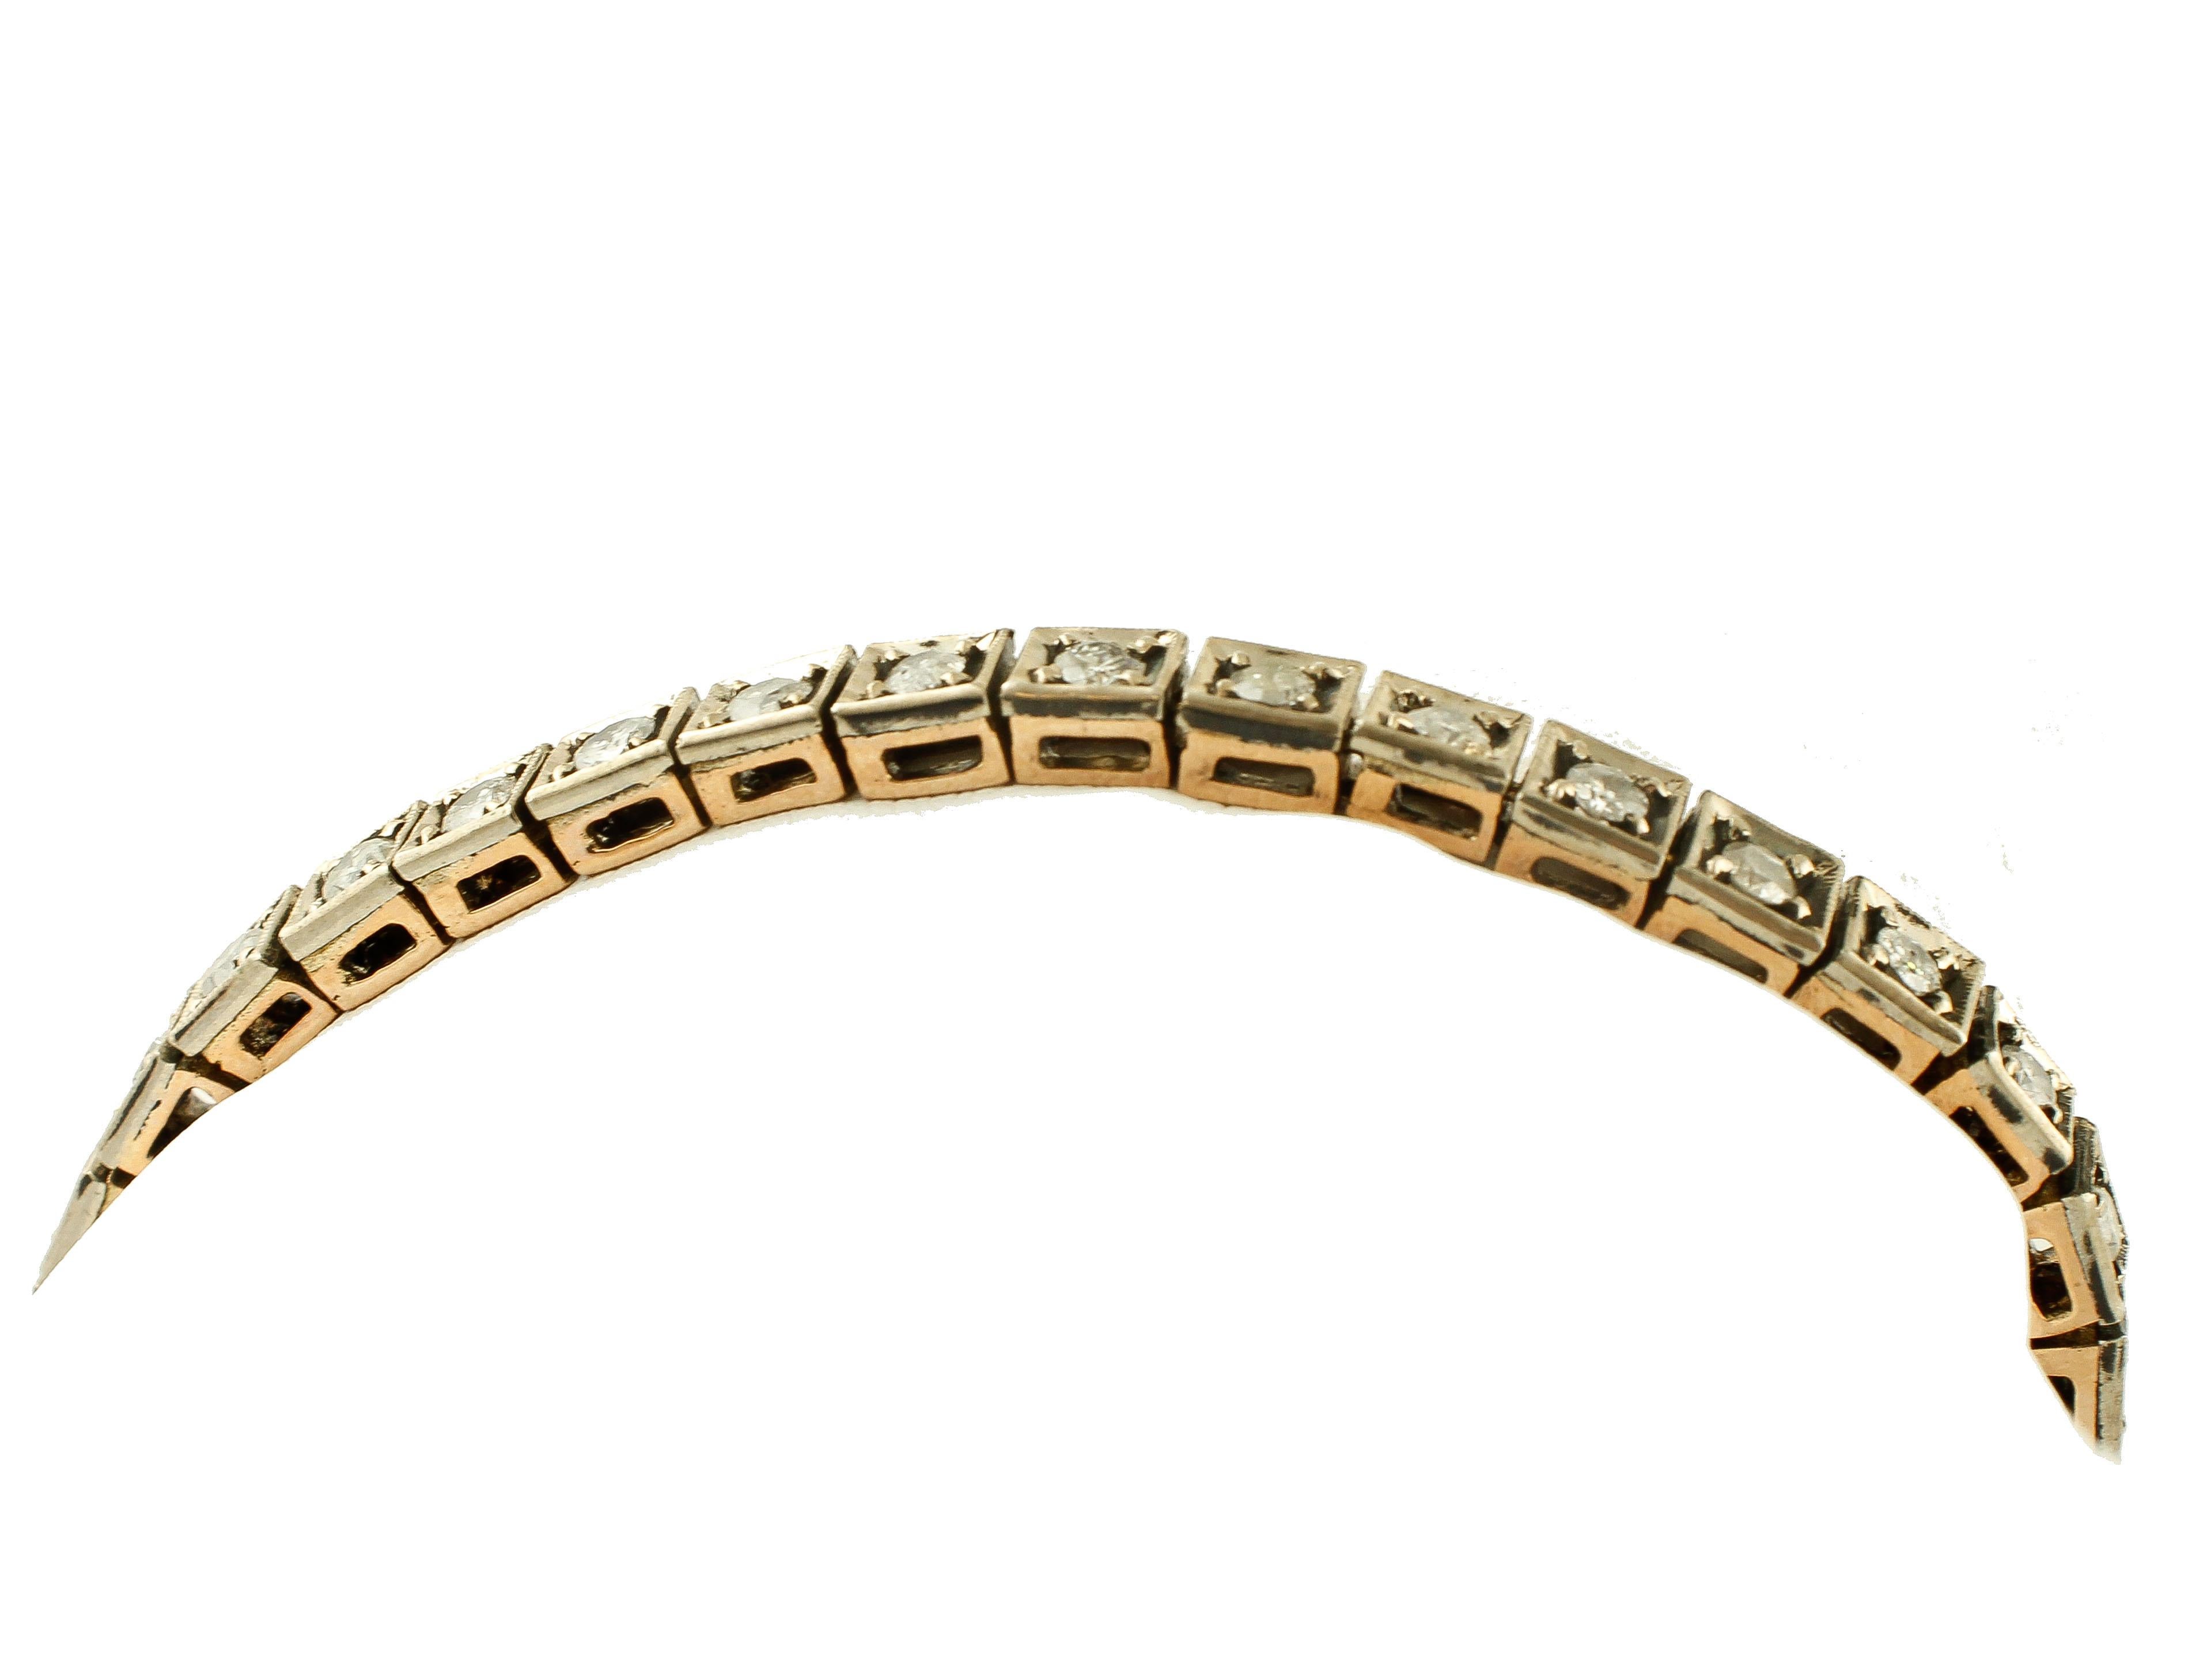 SHIPPING POLICY: 
Shipping costs will be totally covered by the seller.

Retro tennis bracelet in 9k rose gold and silver structure, realized with 3.22 ct of beautiful white diamonds. 
This tennis is totally handmade by Italian master